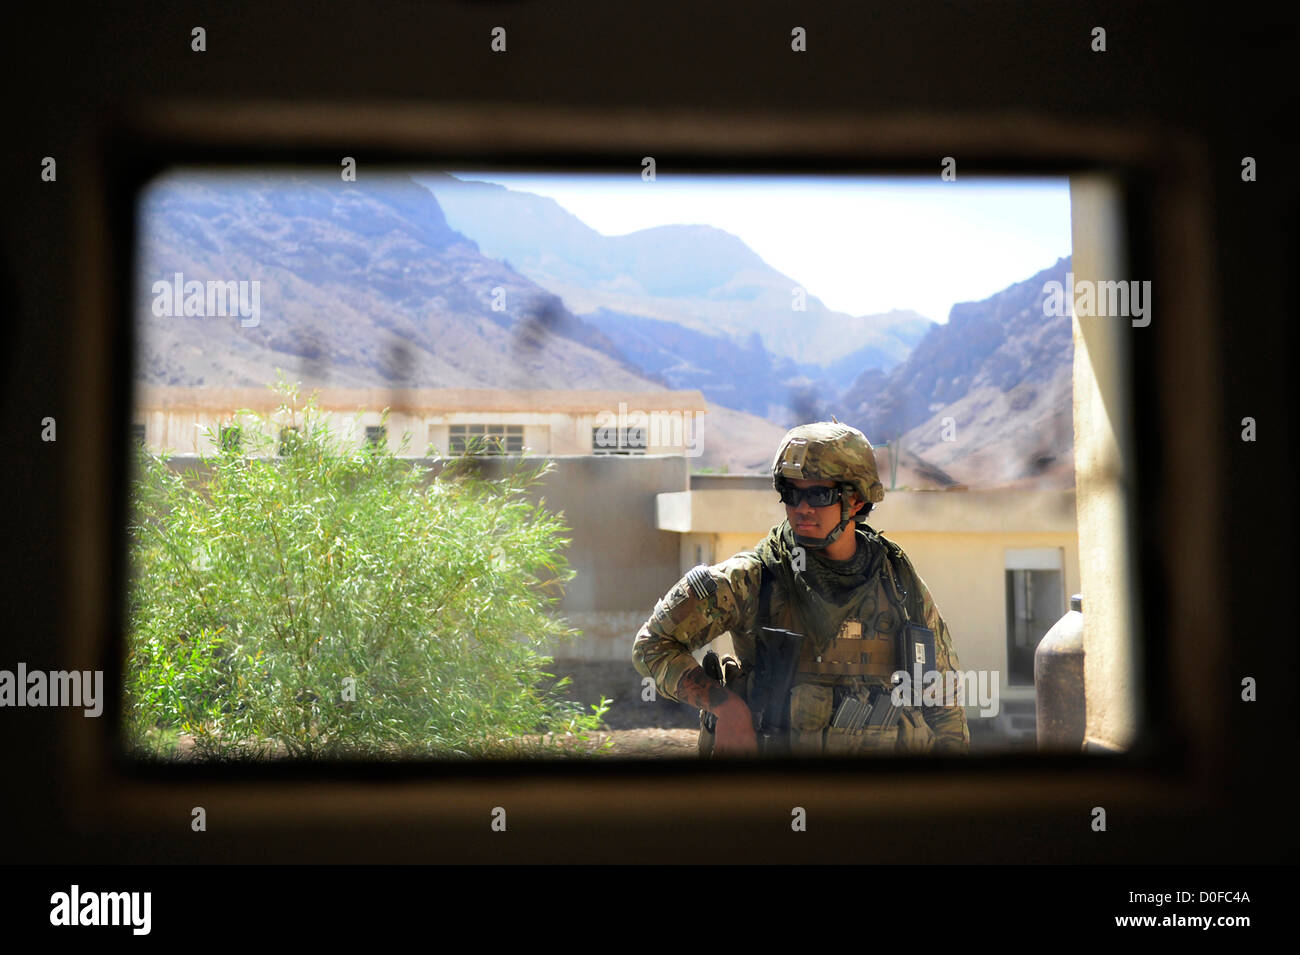 US Navy corpsman guarding a compound seen through the window of an armored vehicle September 26, 2012 during a mission to Pur Chaman district, Farah province, Afghanistan. The mission marks the first time coalition forces have been to the Pur Chaman district in over a year. Stock Photo